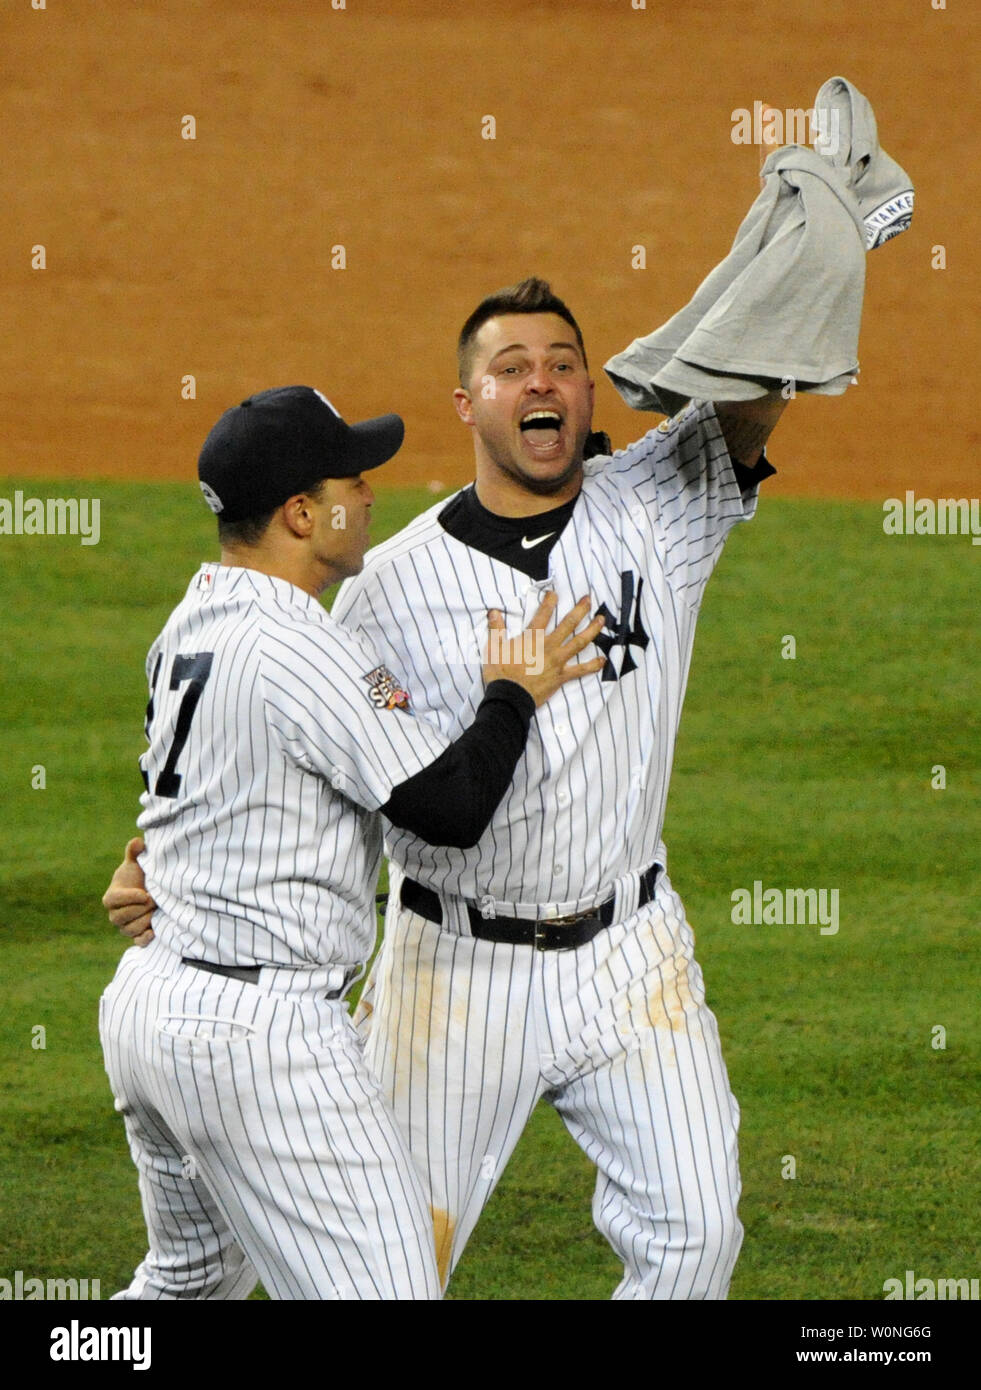 New York Yankees outfielders Nick Swisher (R) and Jerry Hairston, Jr.  celebrate the Yankees 27th World Series Championship in New York on  November 4, 2009. Yankees defeated the Philadelphia Phillies 7-3 in